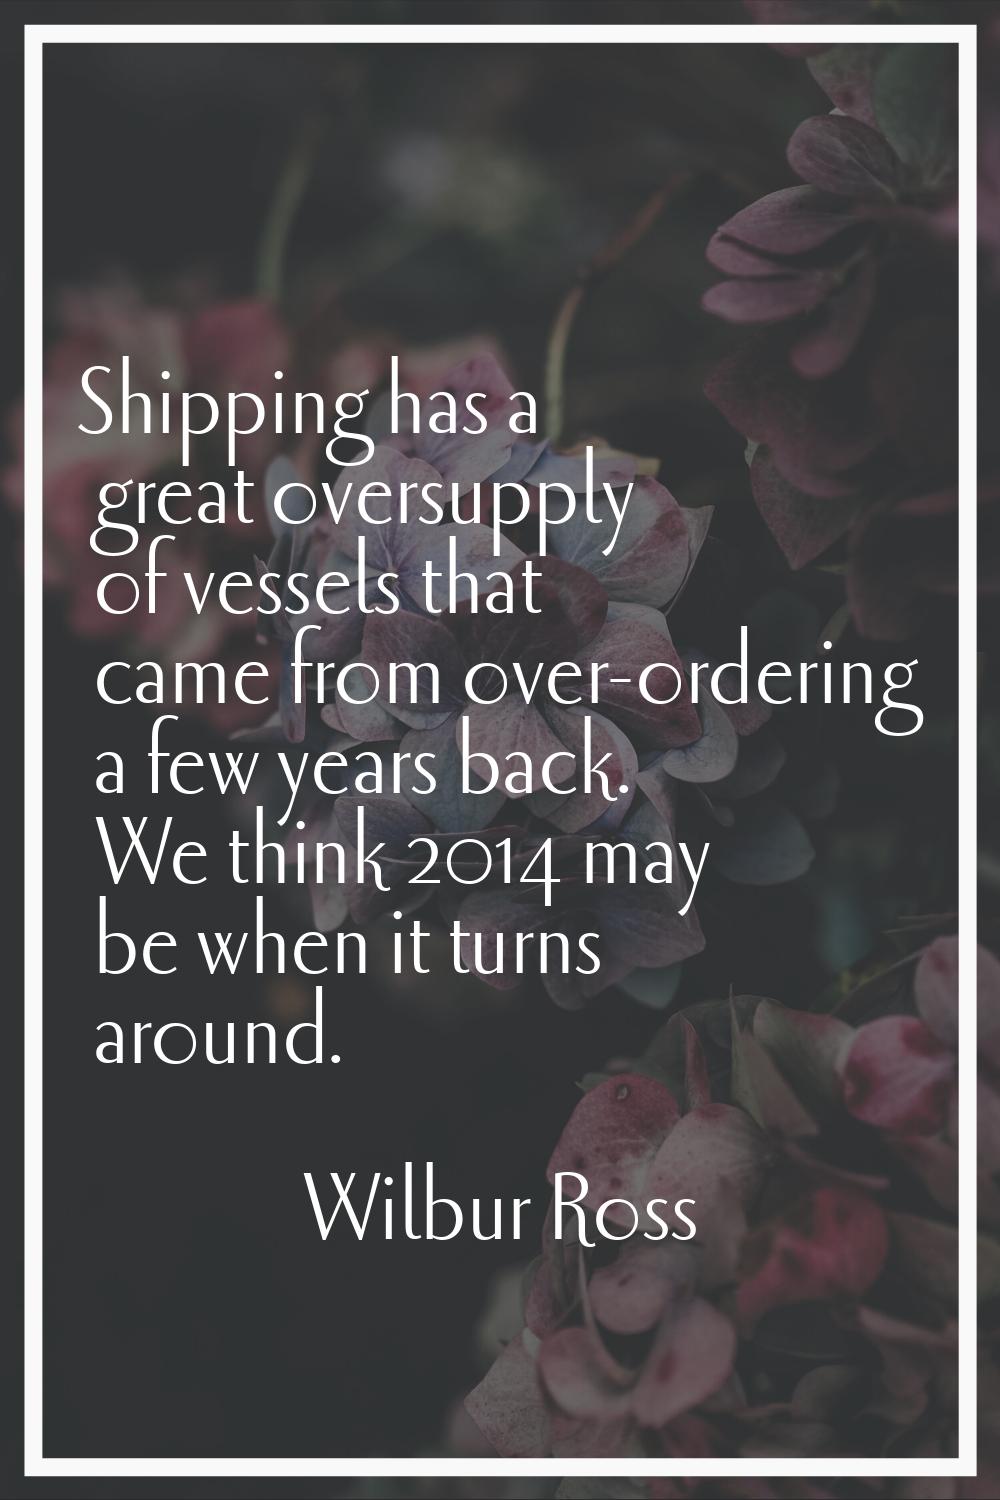 Shipping has a great oversupply of vessels that came from over-ordering a few years back. We think 